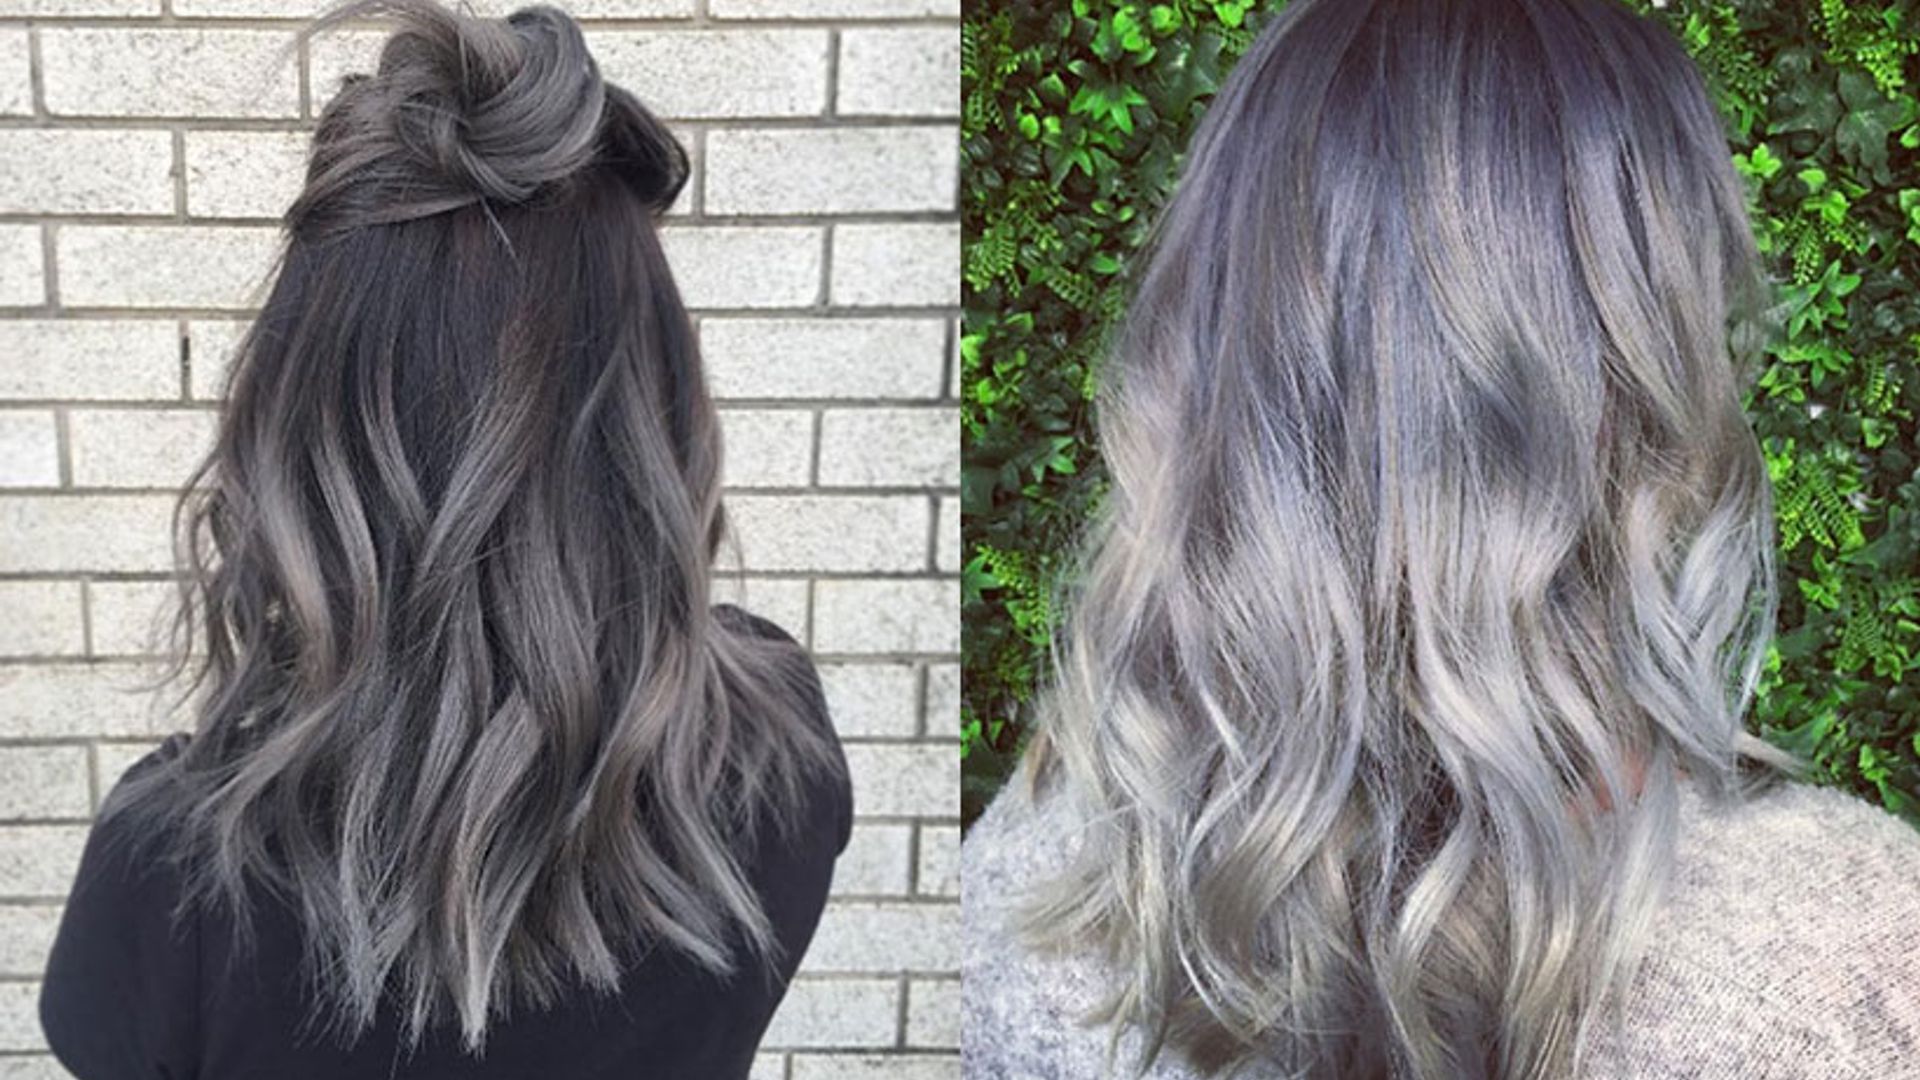 Grey ombré hair is going to be your new beauty obsession